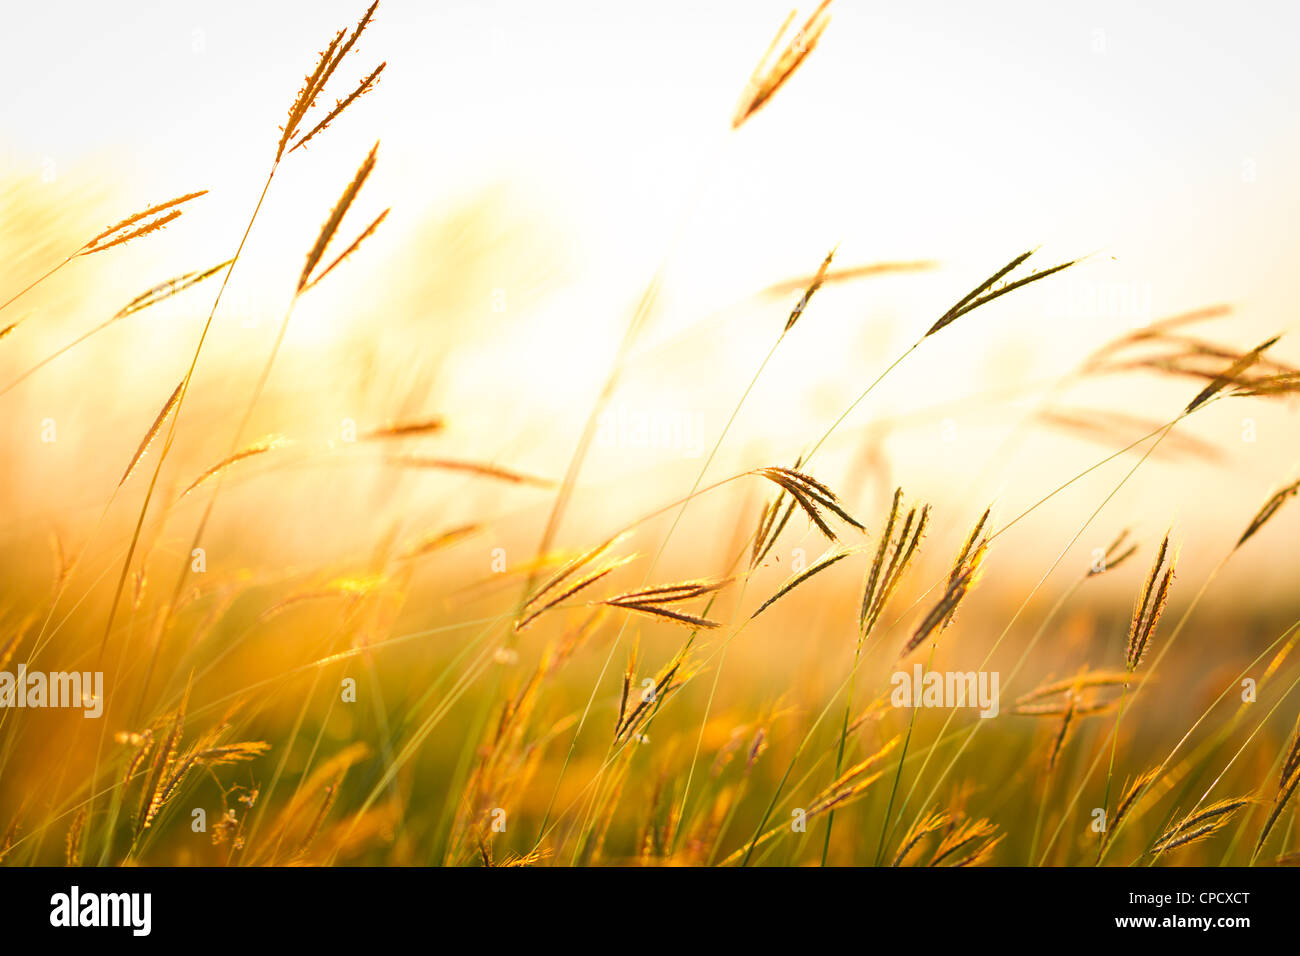 Grass field during sunset background Stock Photo